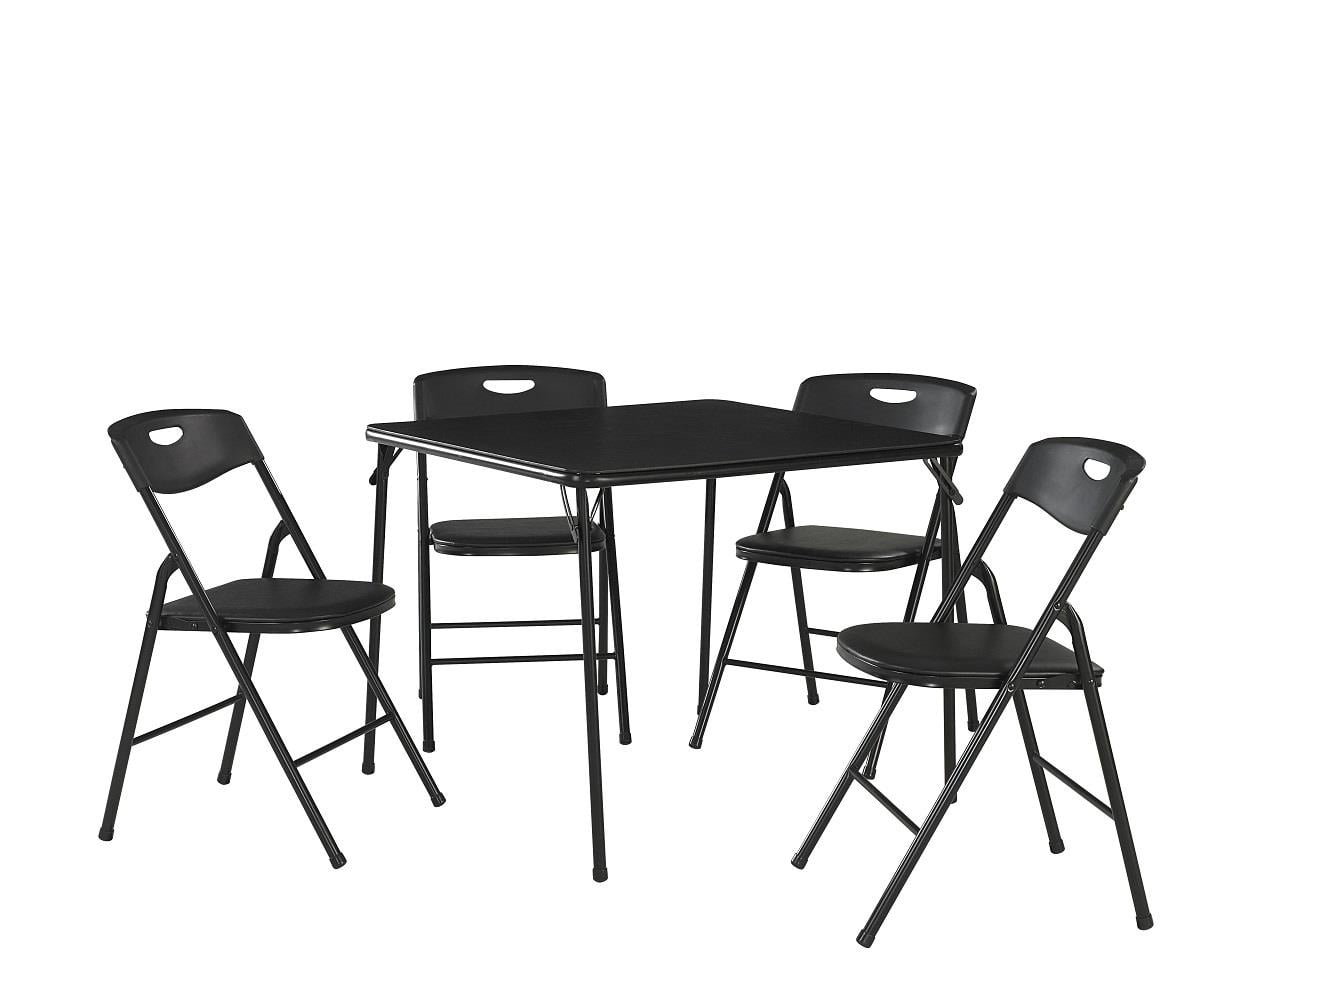 cosco childrens table and chairs